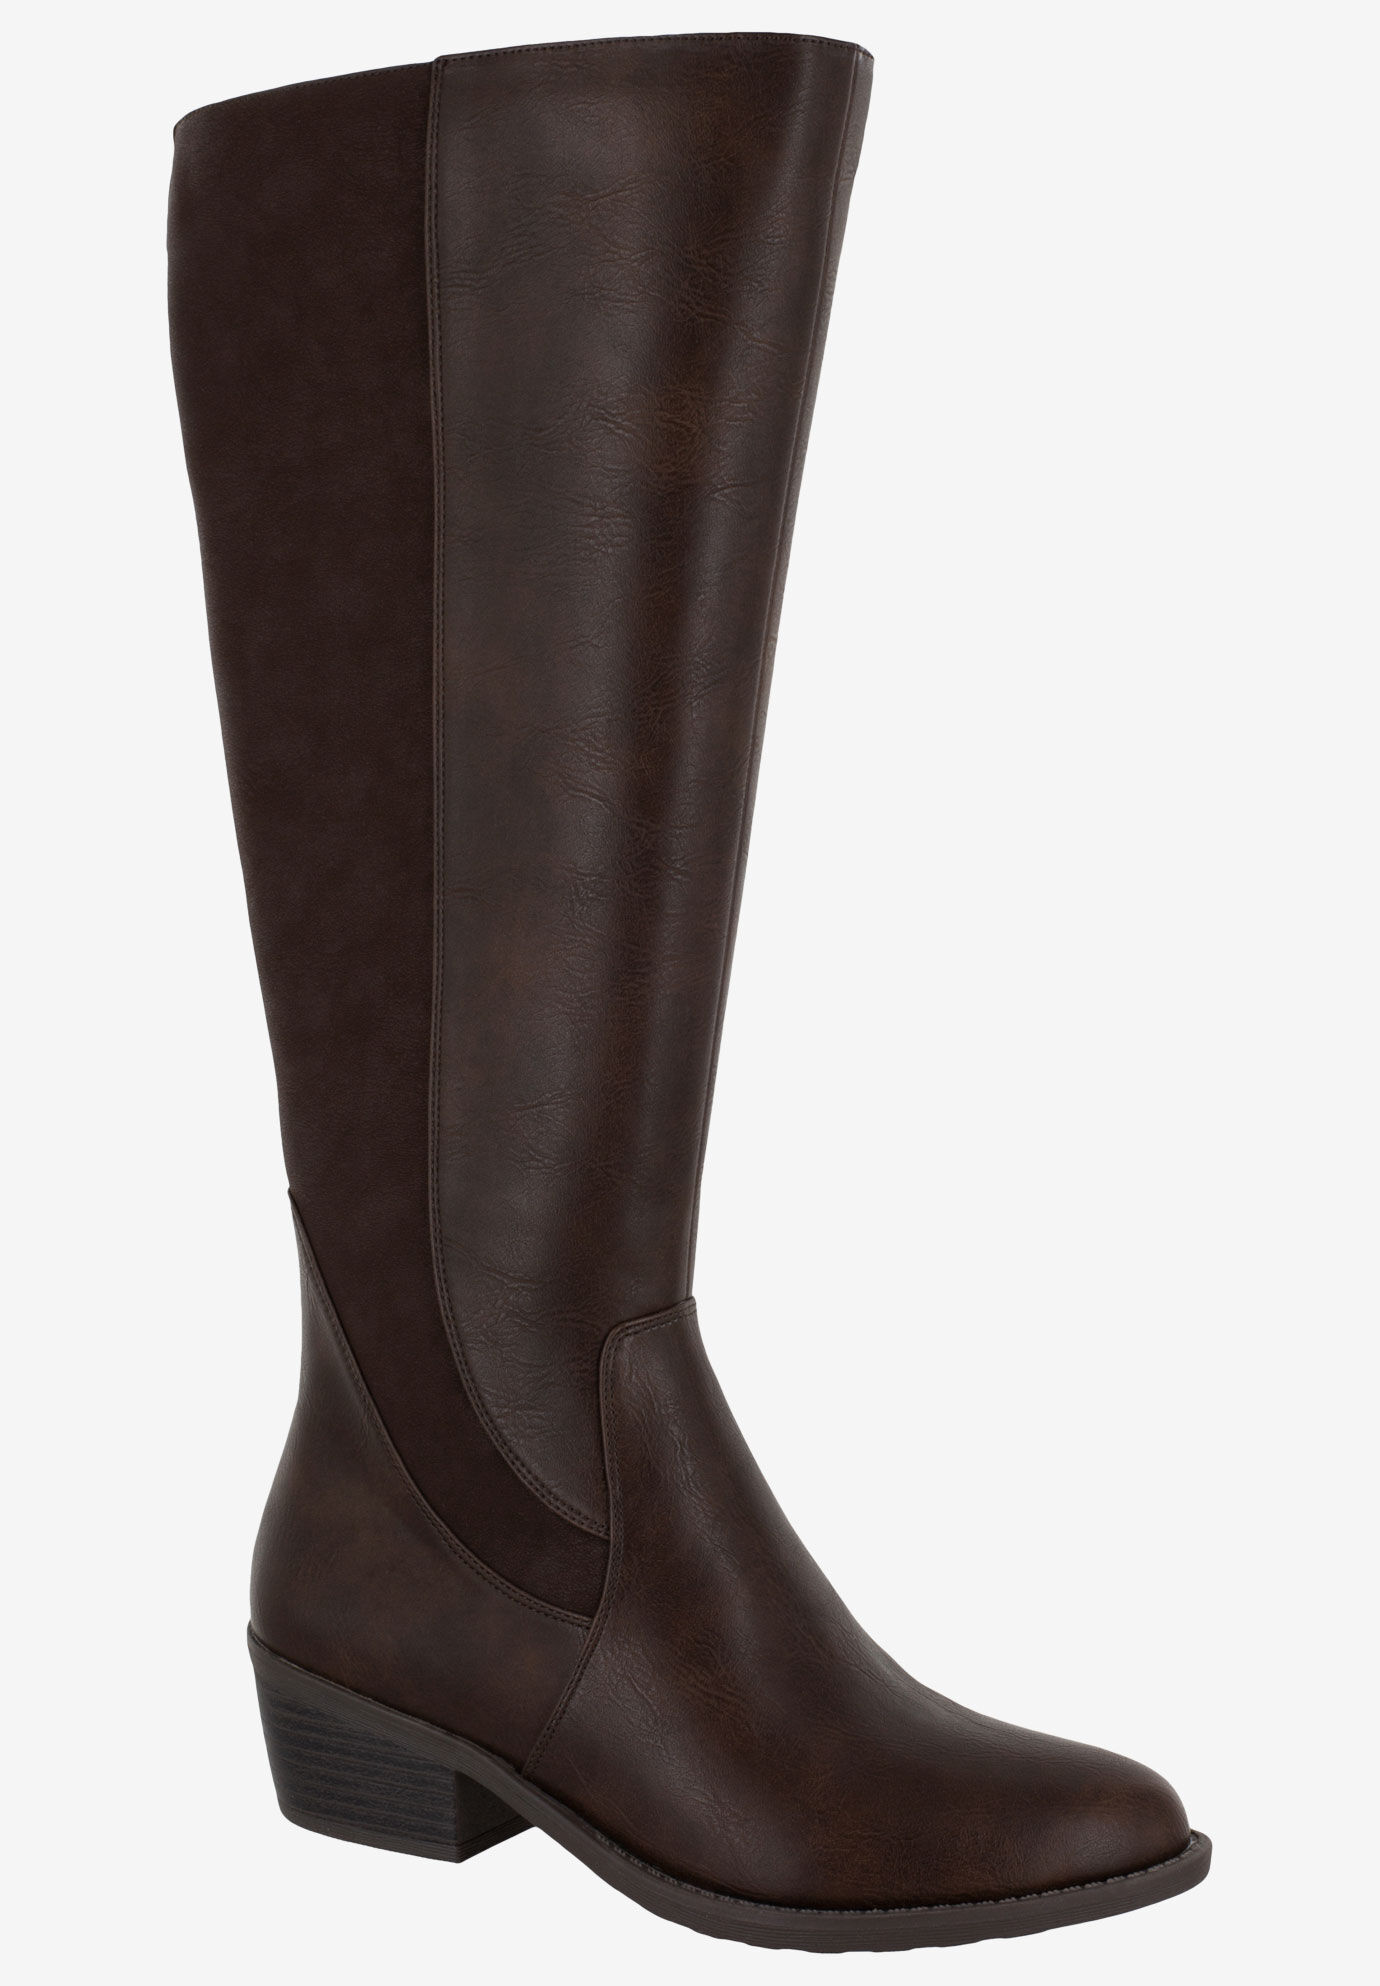 plus size wide boots